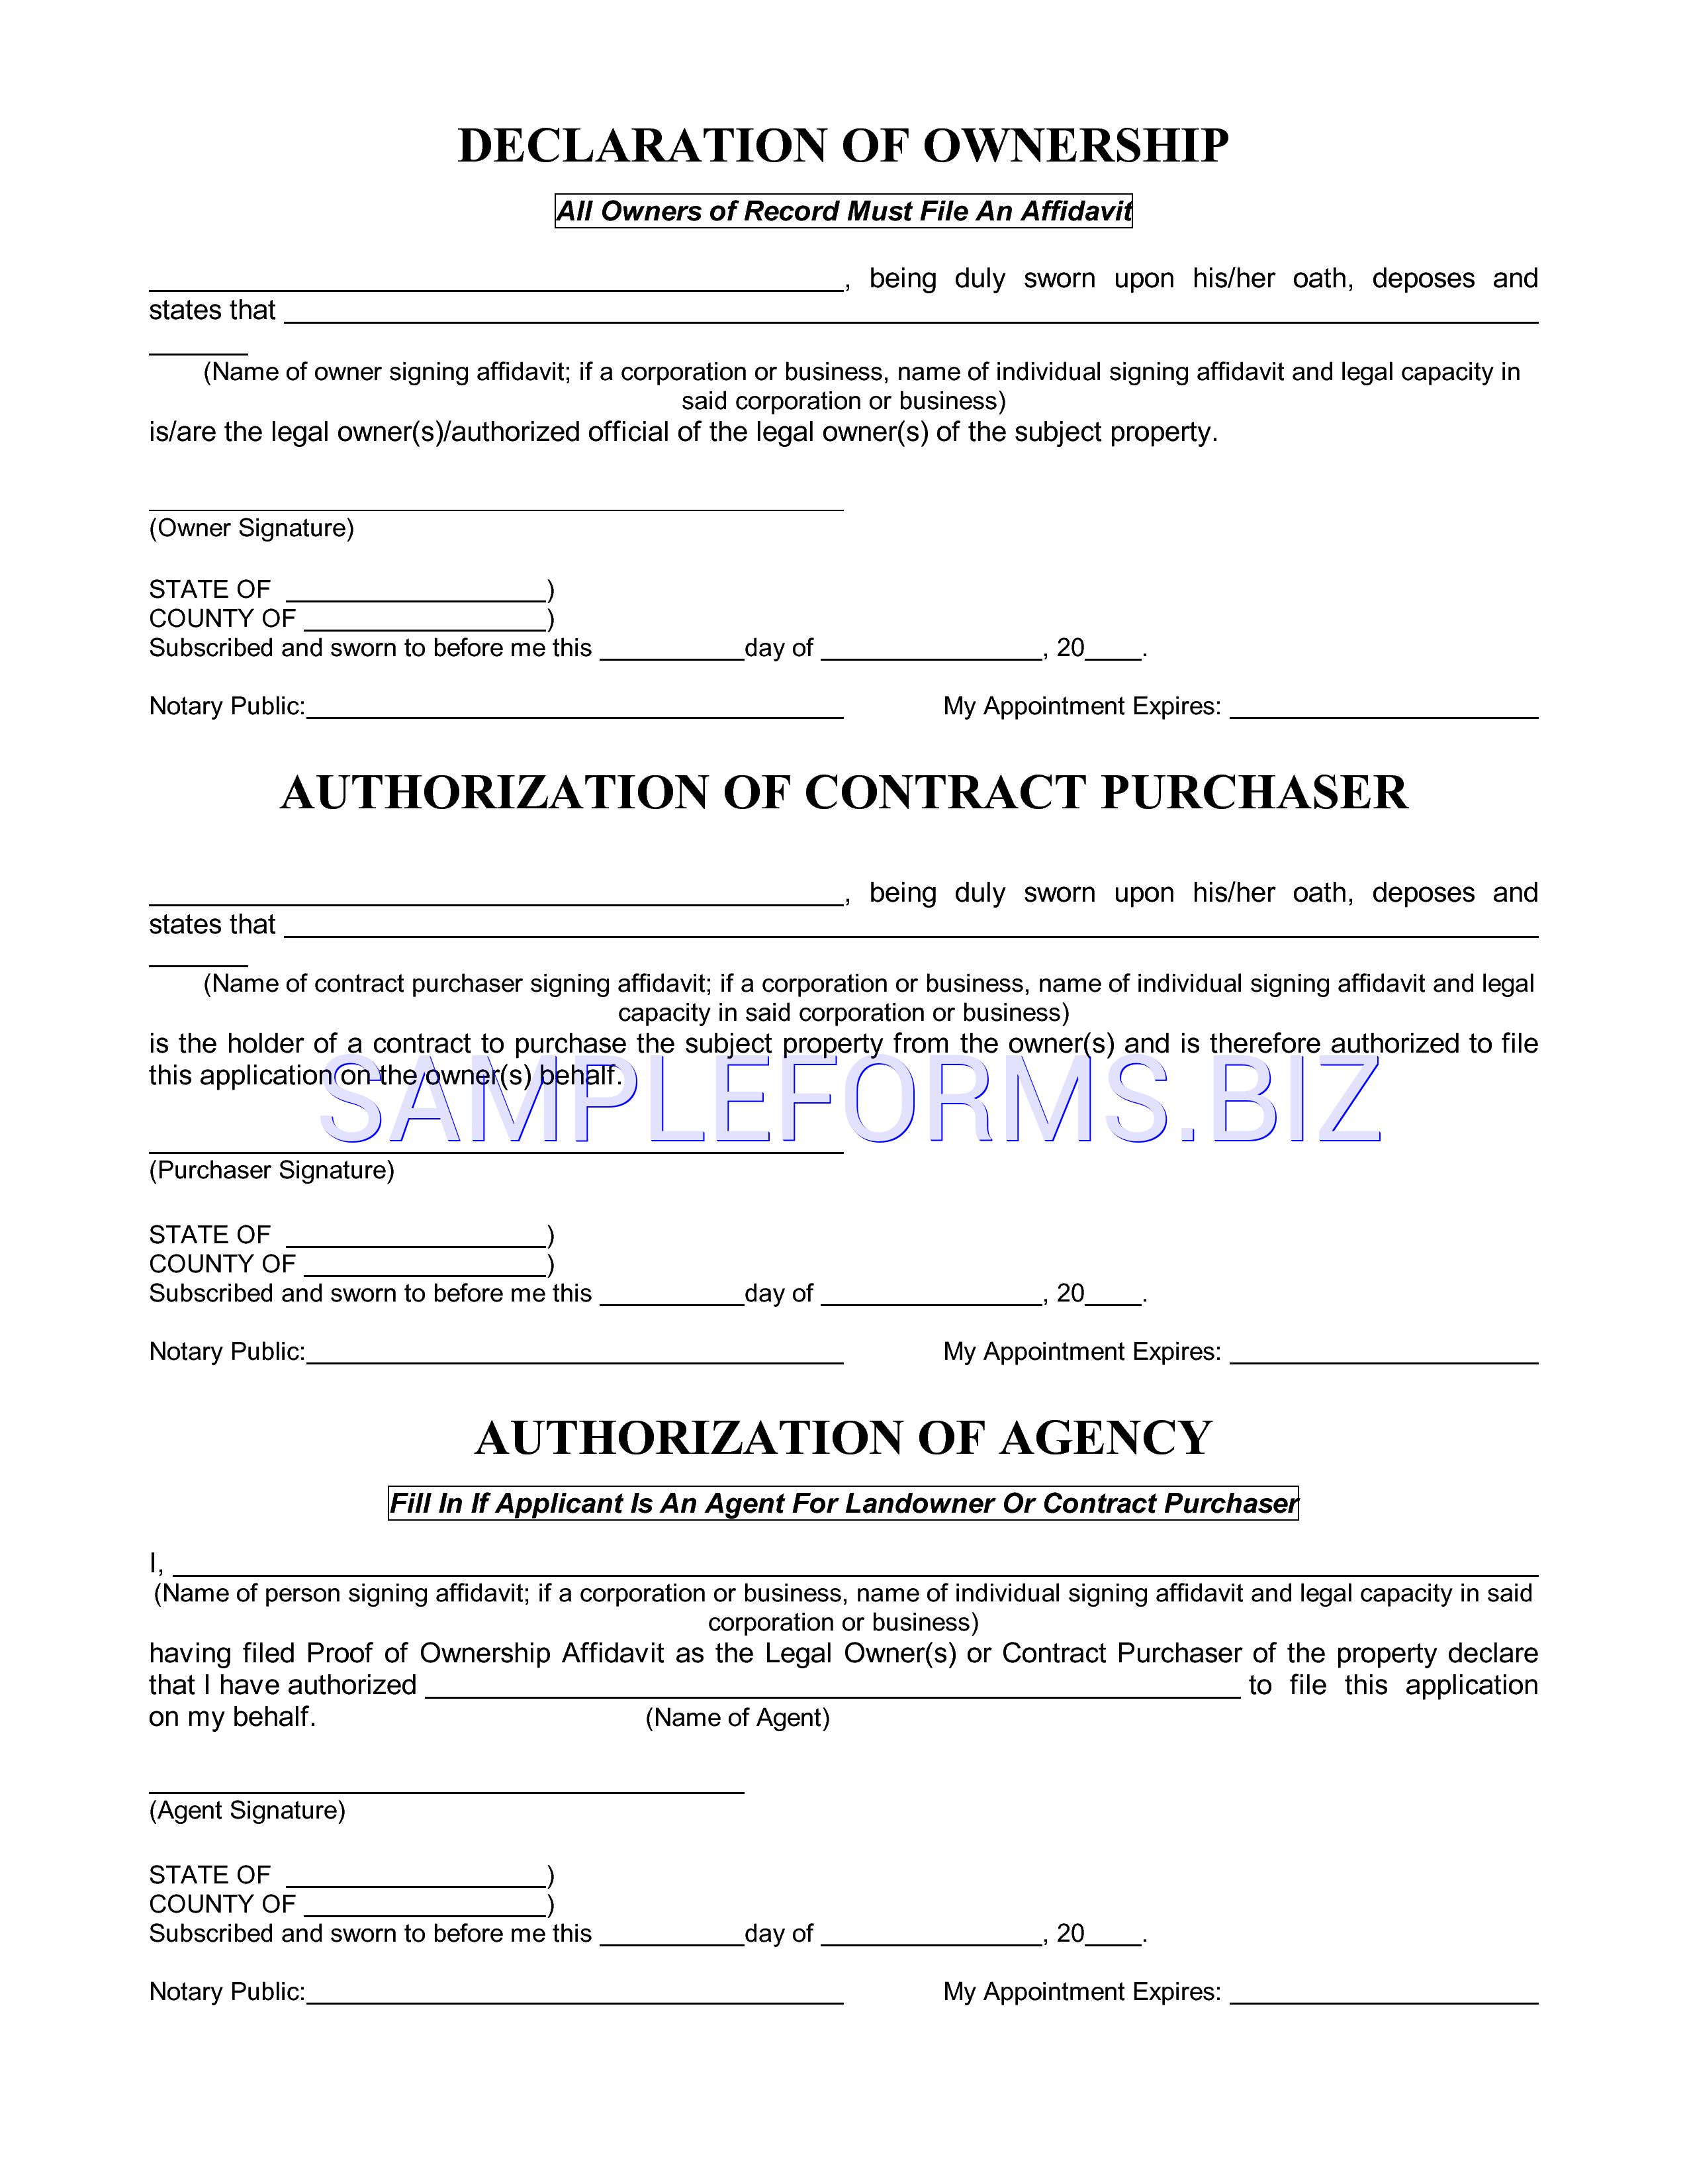 Preview free downloadable Declaration of Ownership in PDF (page 1)